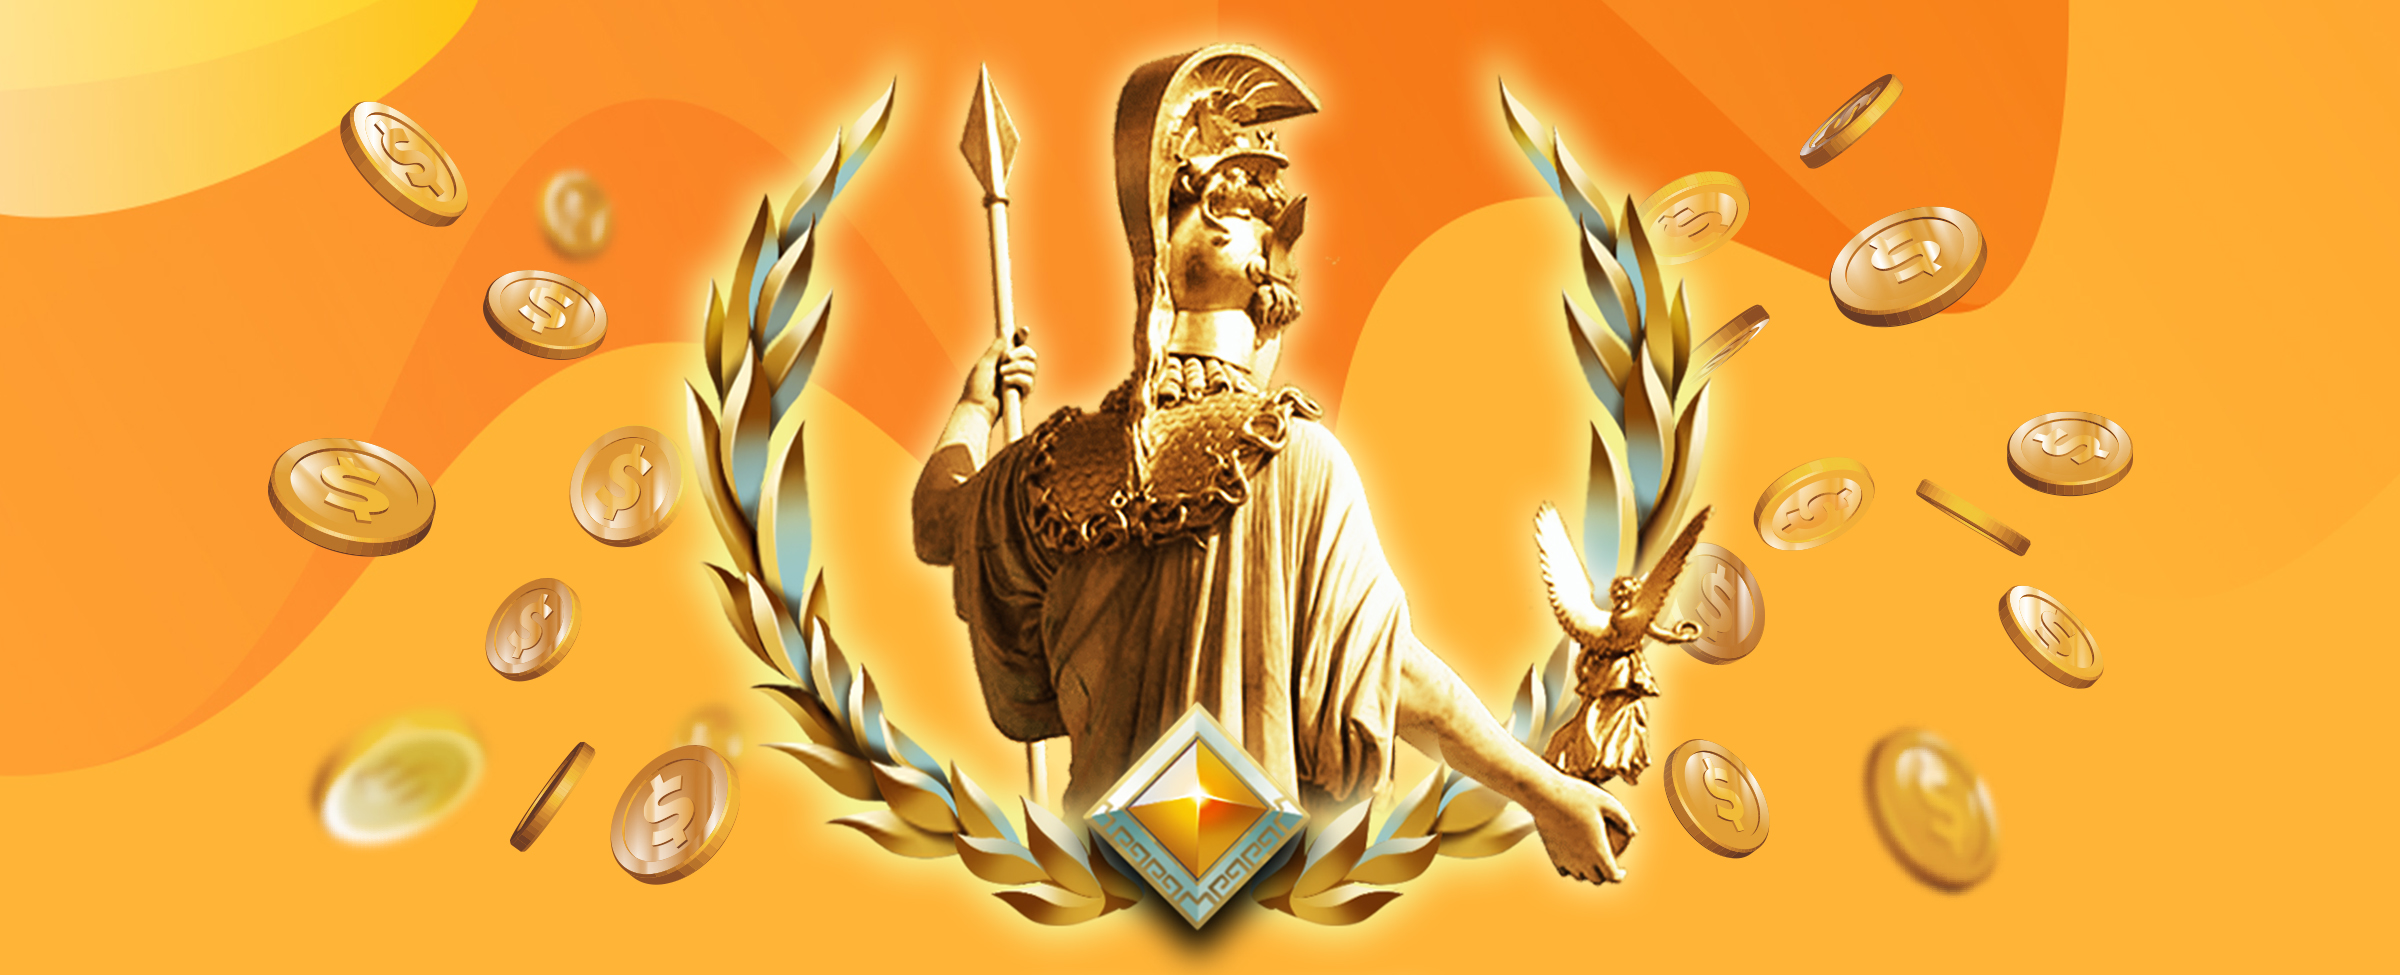 An illustrated statue of Athena, the Greek goddess, is pictured from the waist up, encased by two circular metal thorns joined in the middle by an amber jewel. Gold coins float across the screen to surround the statue.